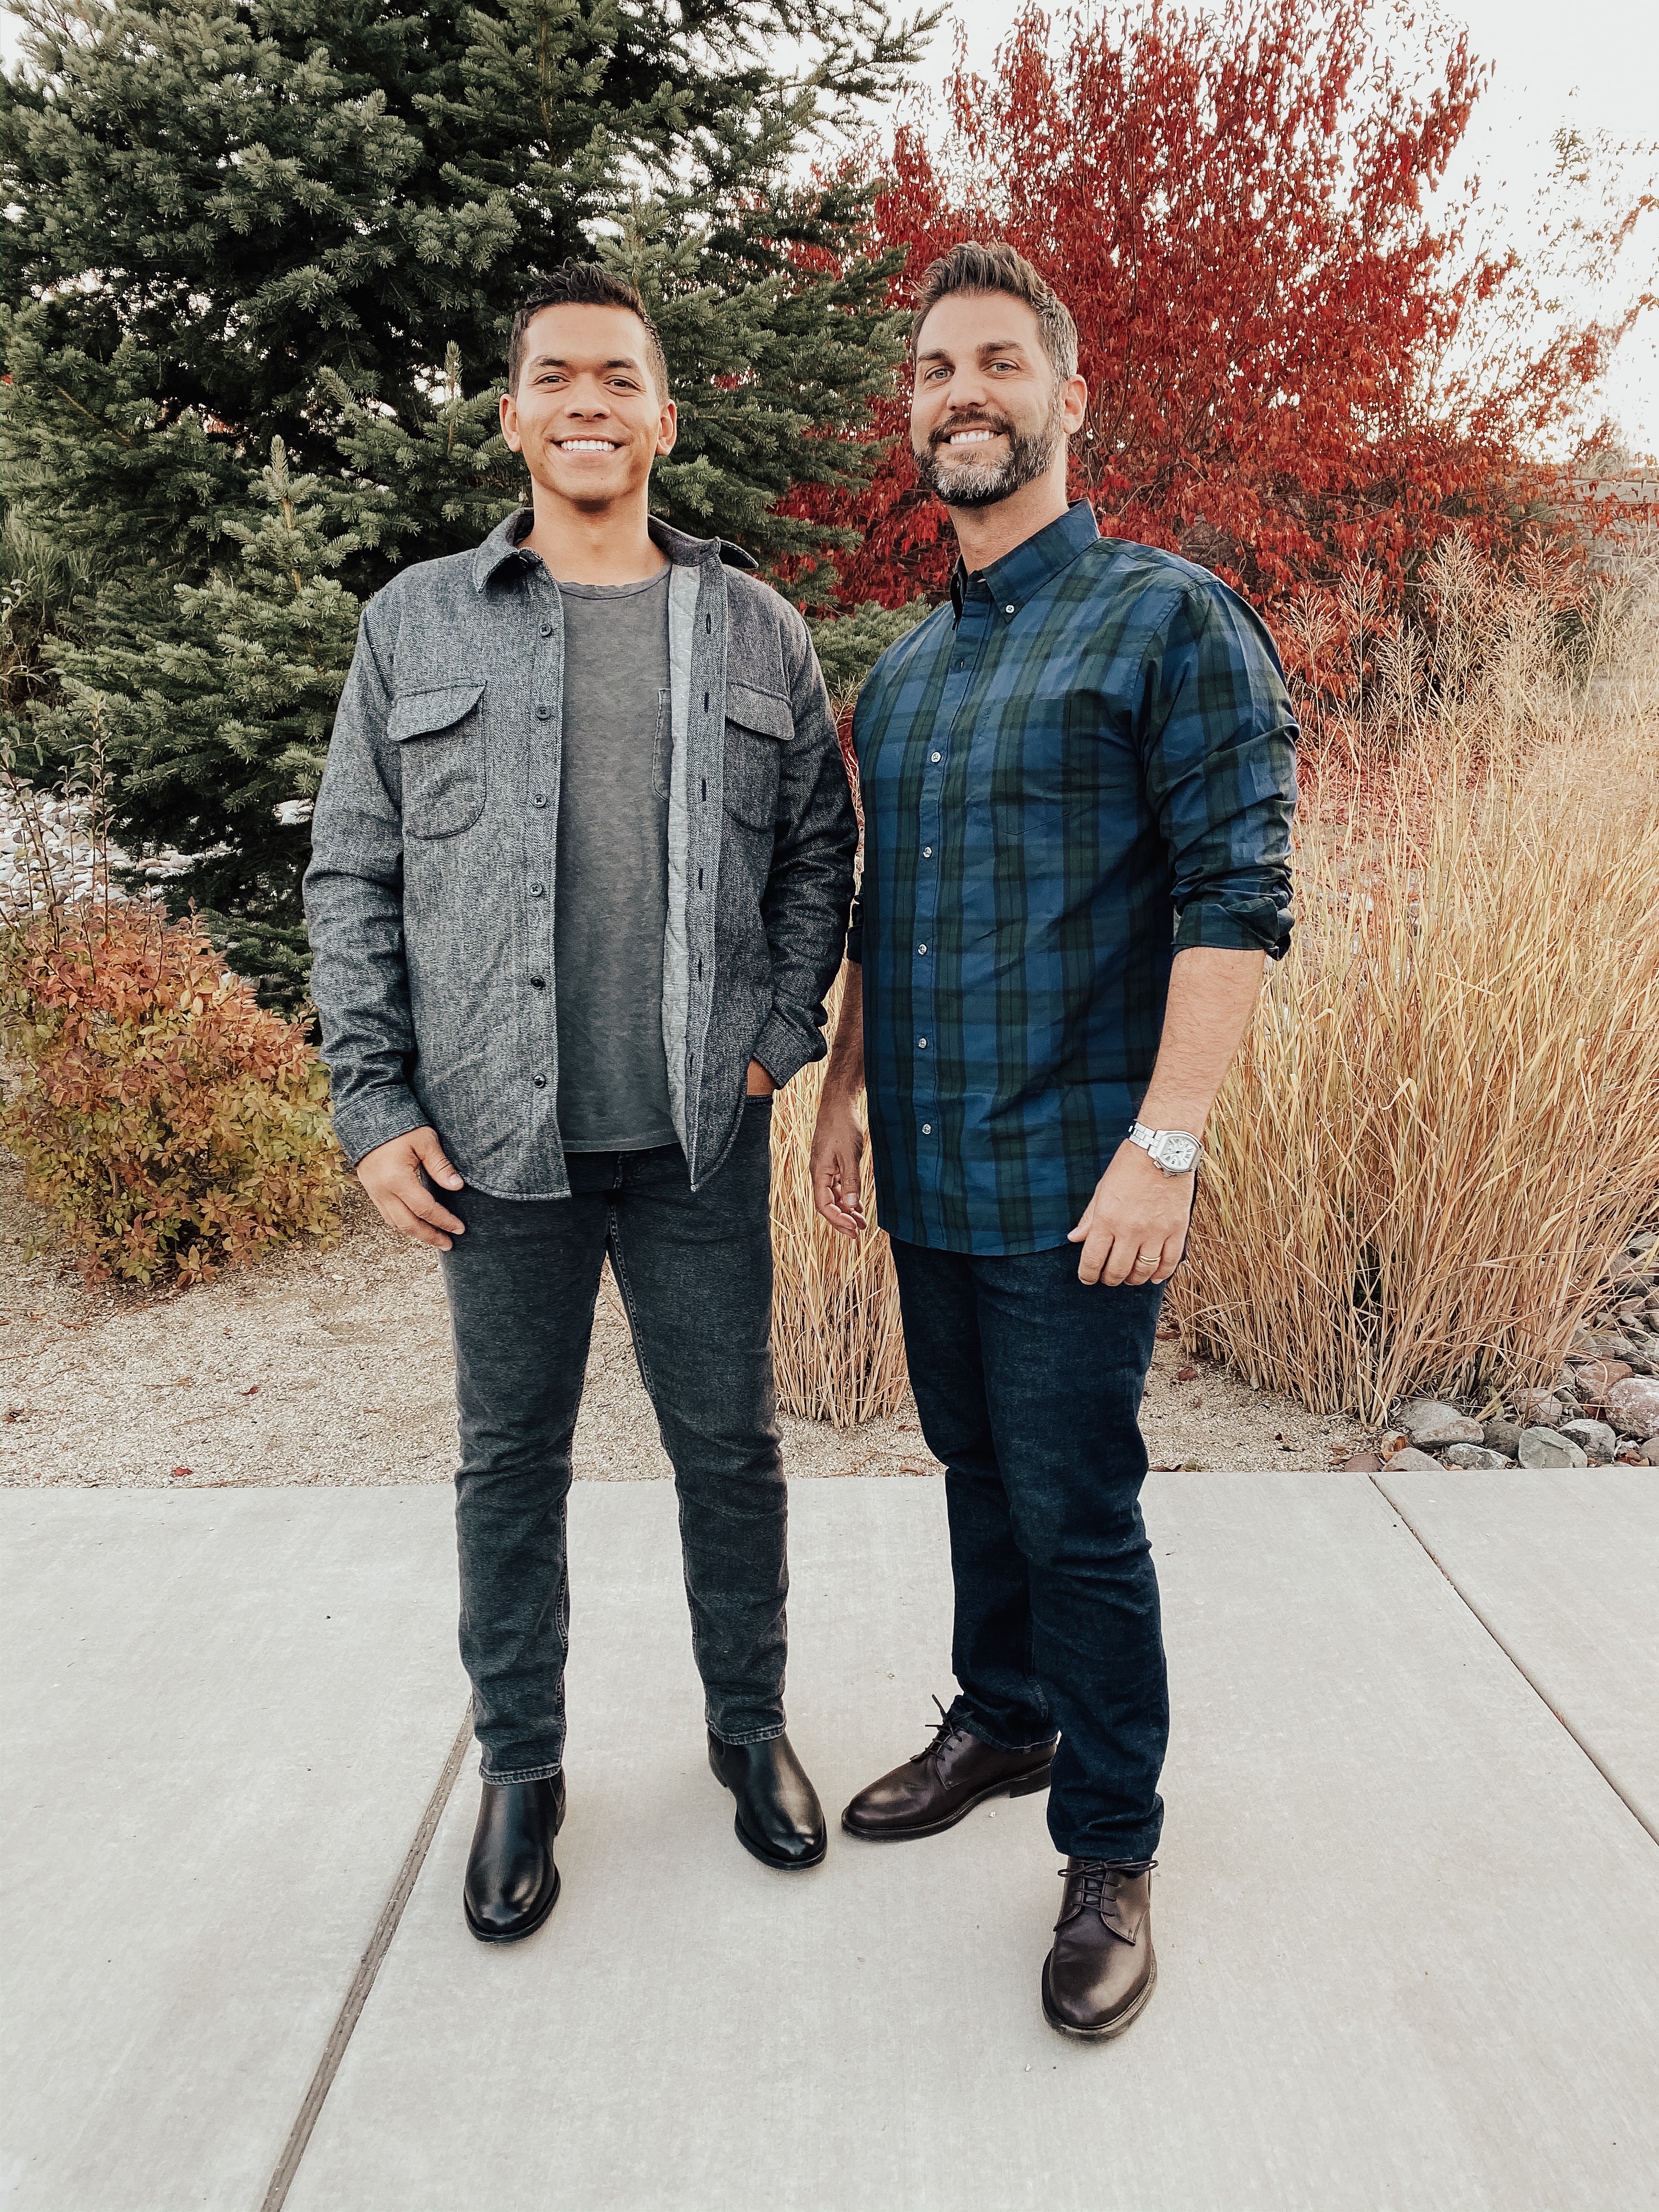 Reno Bloggers Ashley Zeal and Emily Wieczorek borrow their husbands for a blog post to show off their date night style with Bonobos.